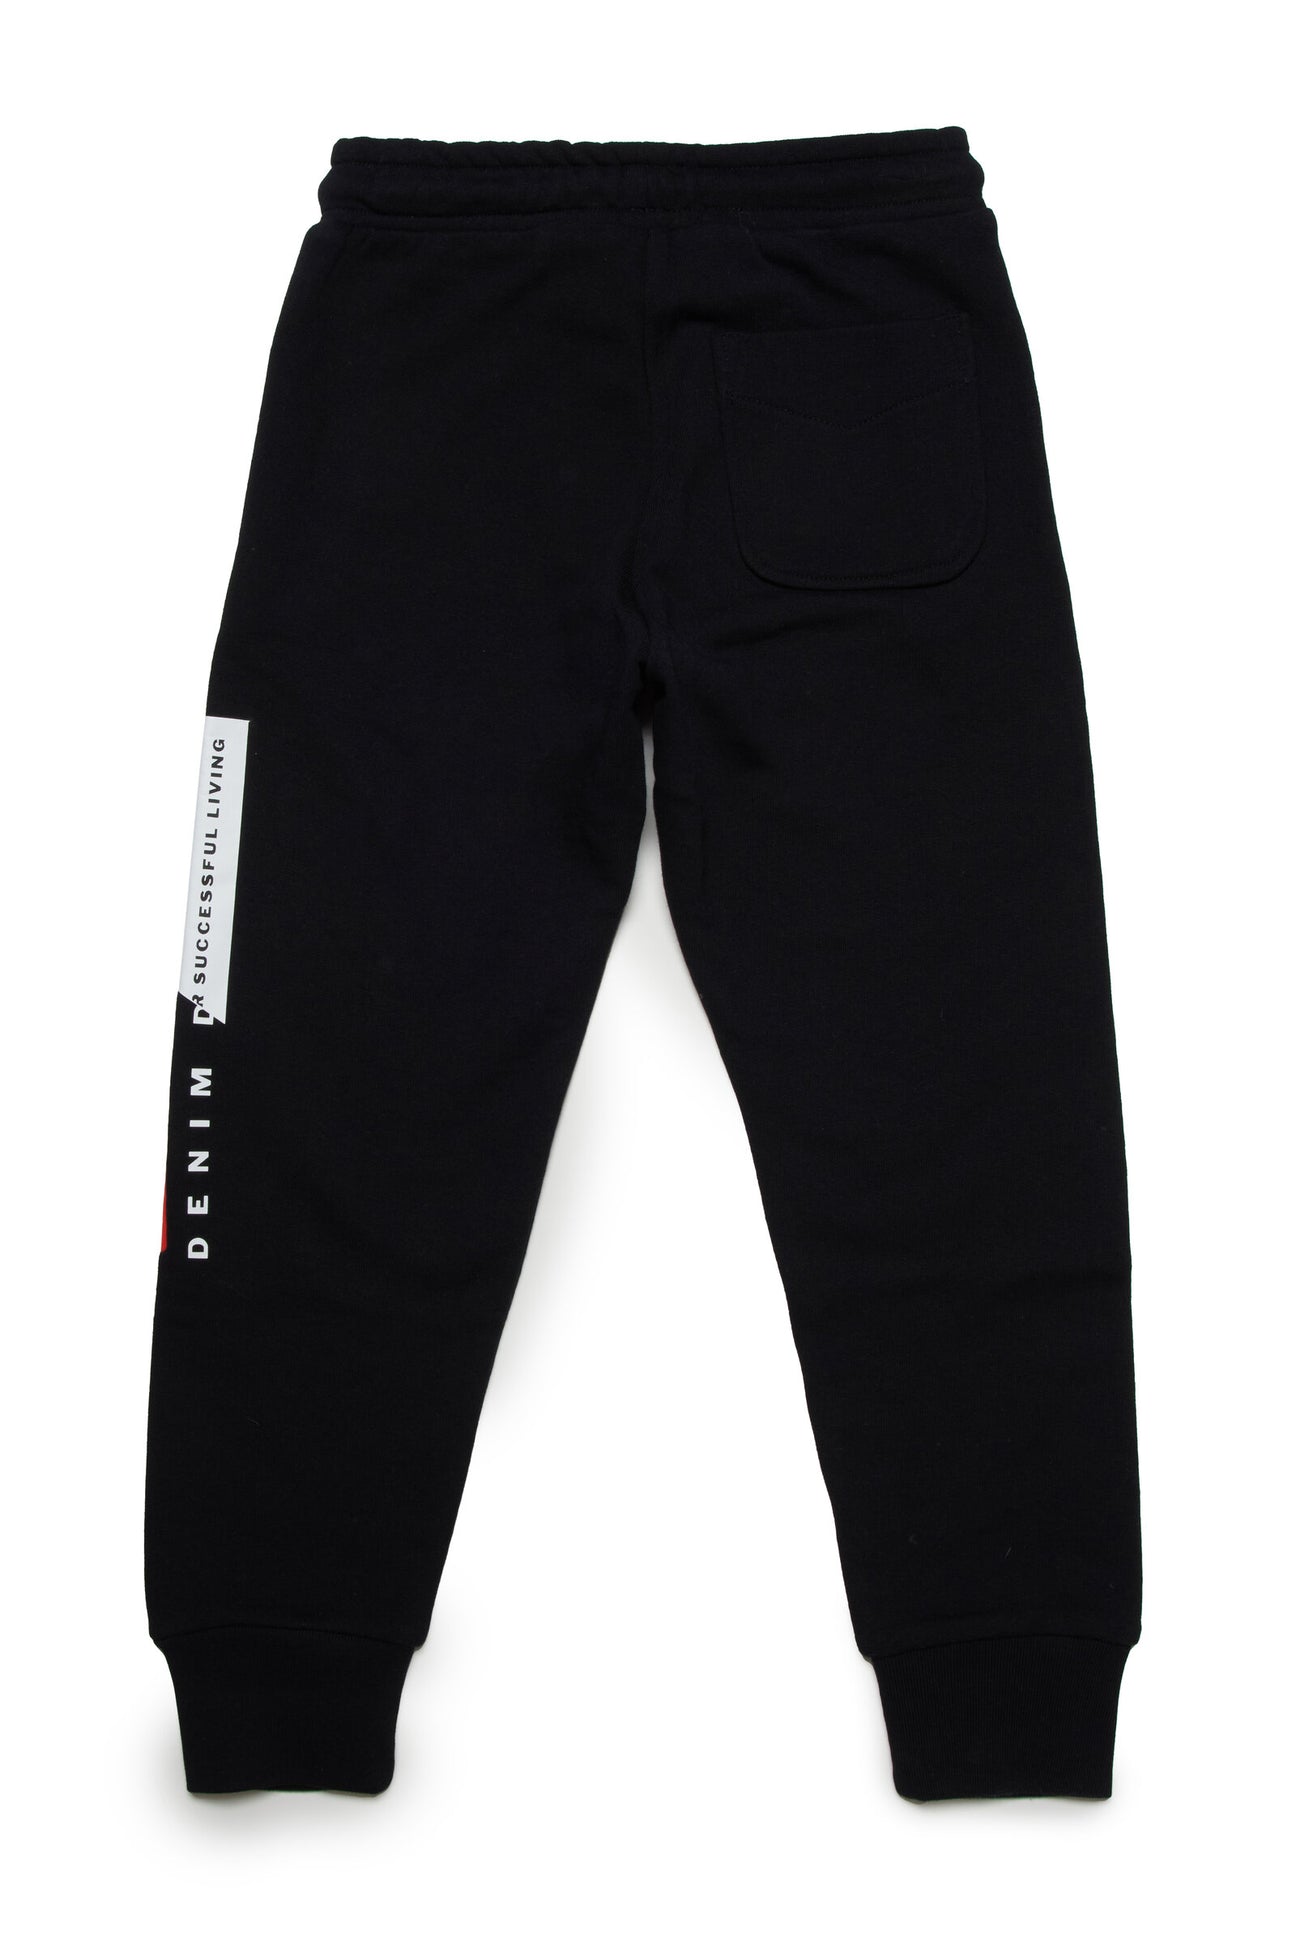 Black jogger pants with Diesel double logo Black jogger pants with Diesel double logo